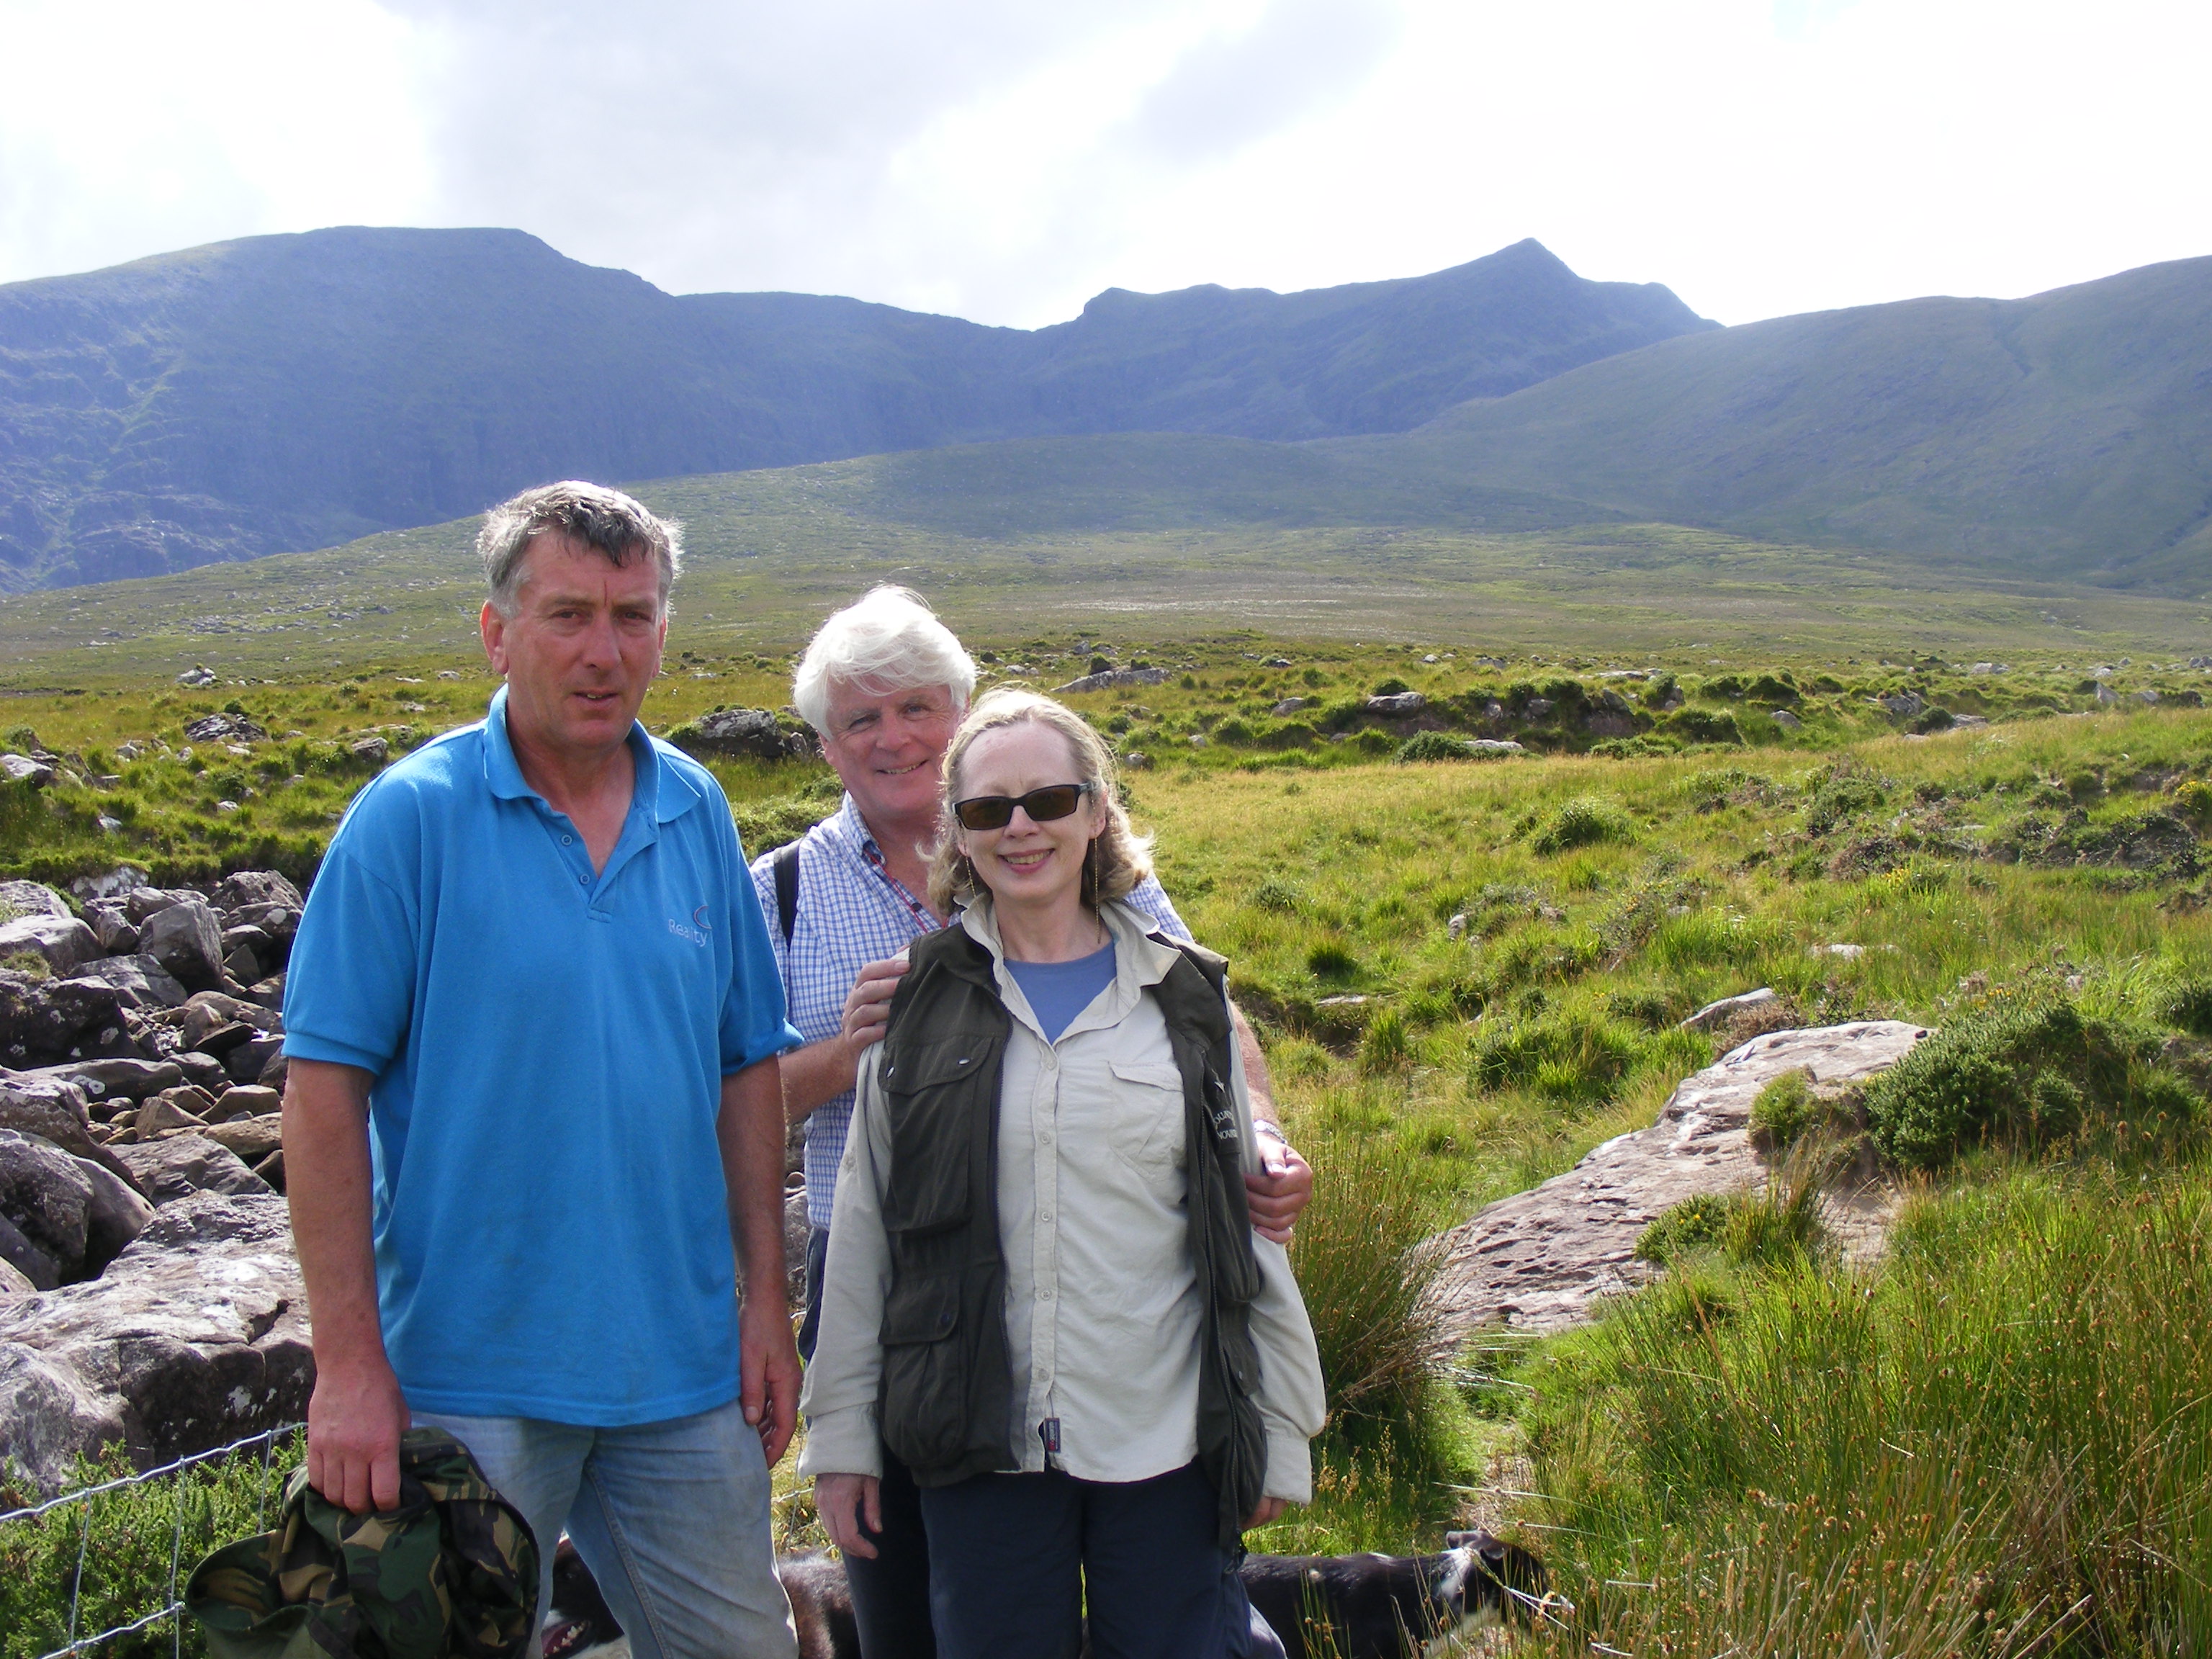 Katie and Graham Frazer along with local man
              Seamus Fitzgerald who guided us up the mountain.